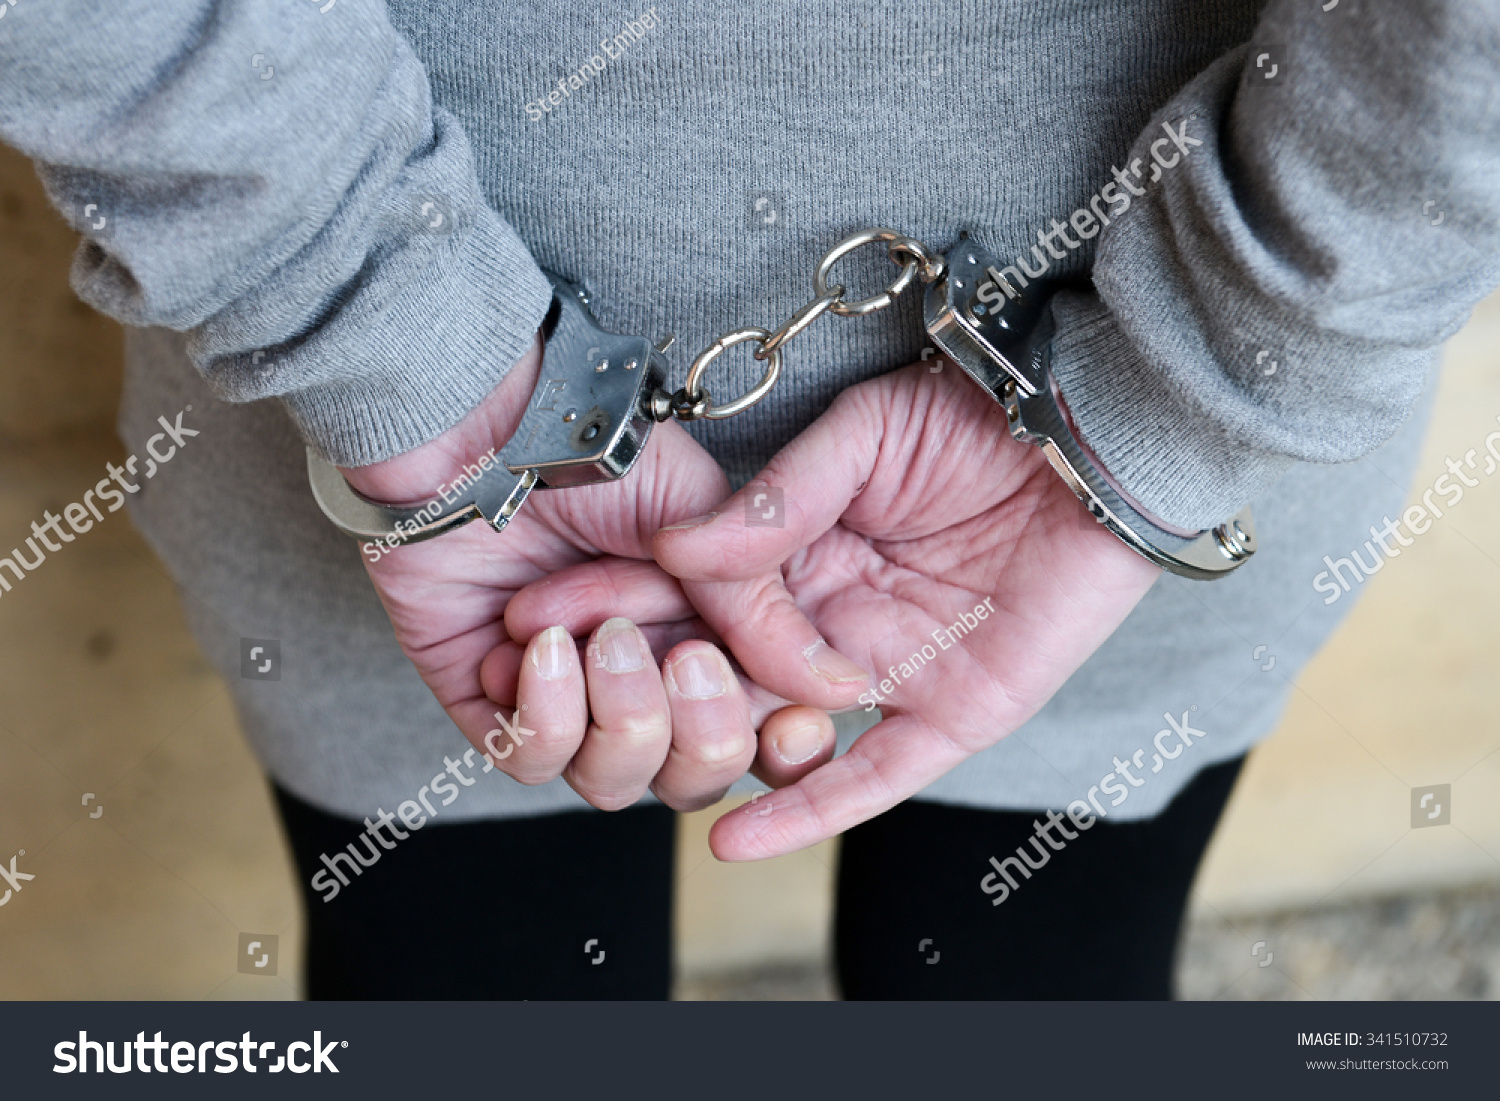 Arrested Woman Handcuffs Behind Her Back Stock Photo 341510732 Shutterstock...